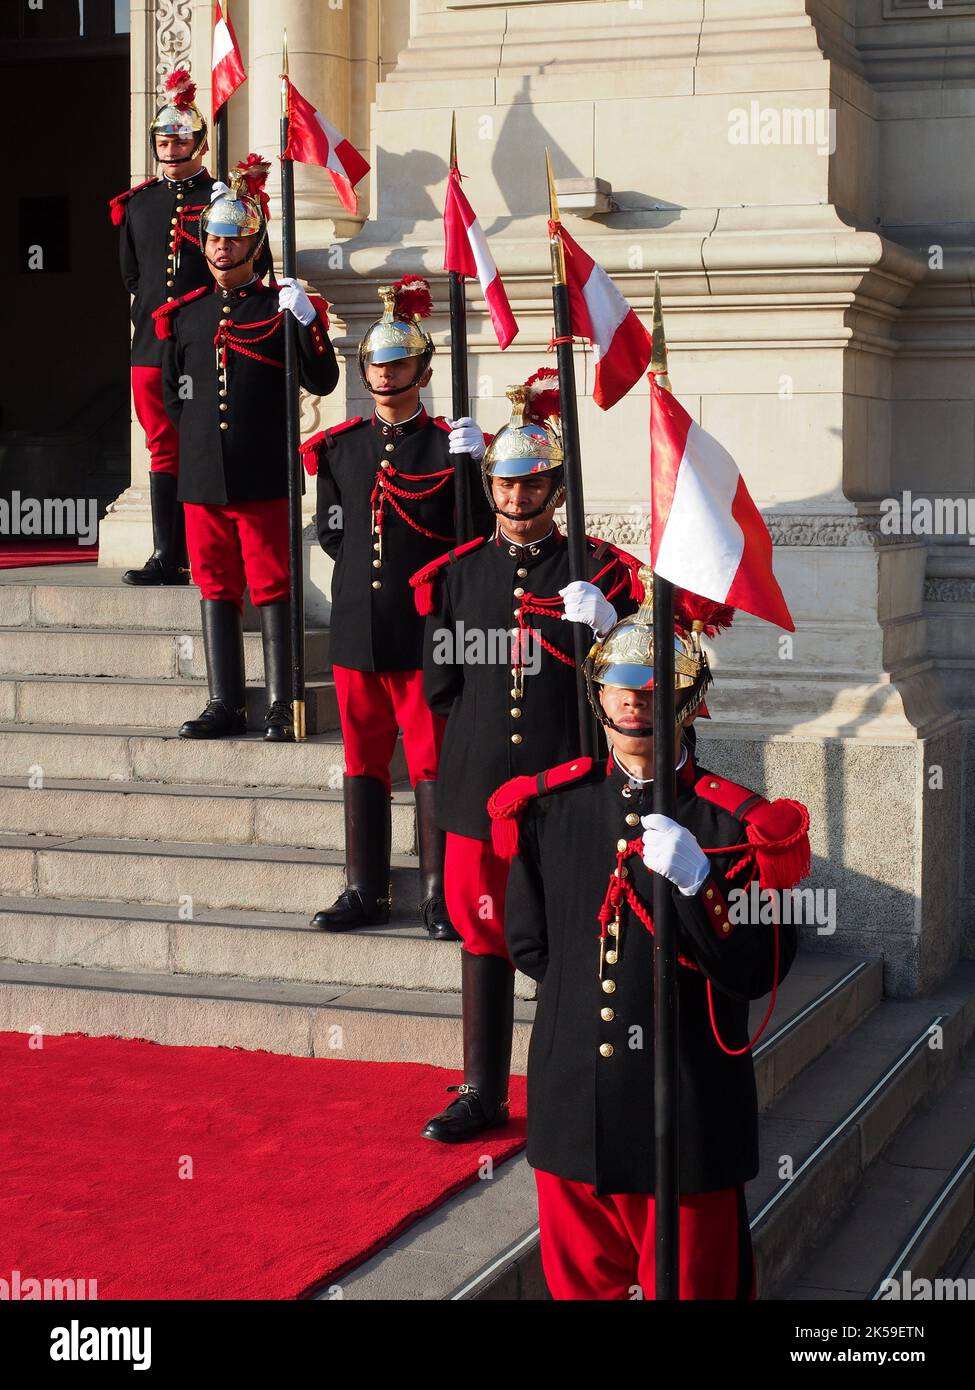 Lima, Peru, 06/10/2022, Honor guard at the facade of the Government Palace of Peru during the visit of the United States Secretary Antony Blinken on the framework of the OAS General Assembly taking place in Lima, Peru, from October 5 to 7, 2022. Stock Photo